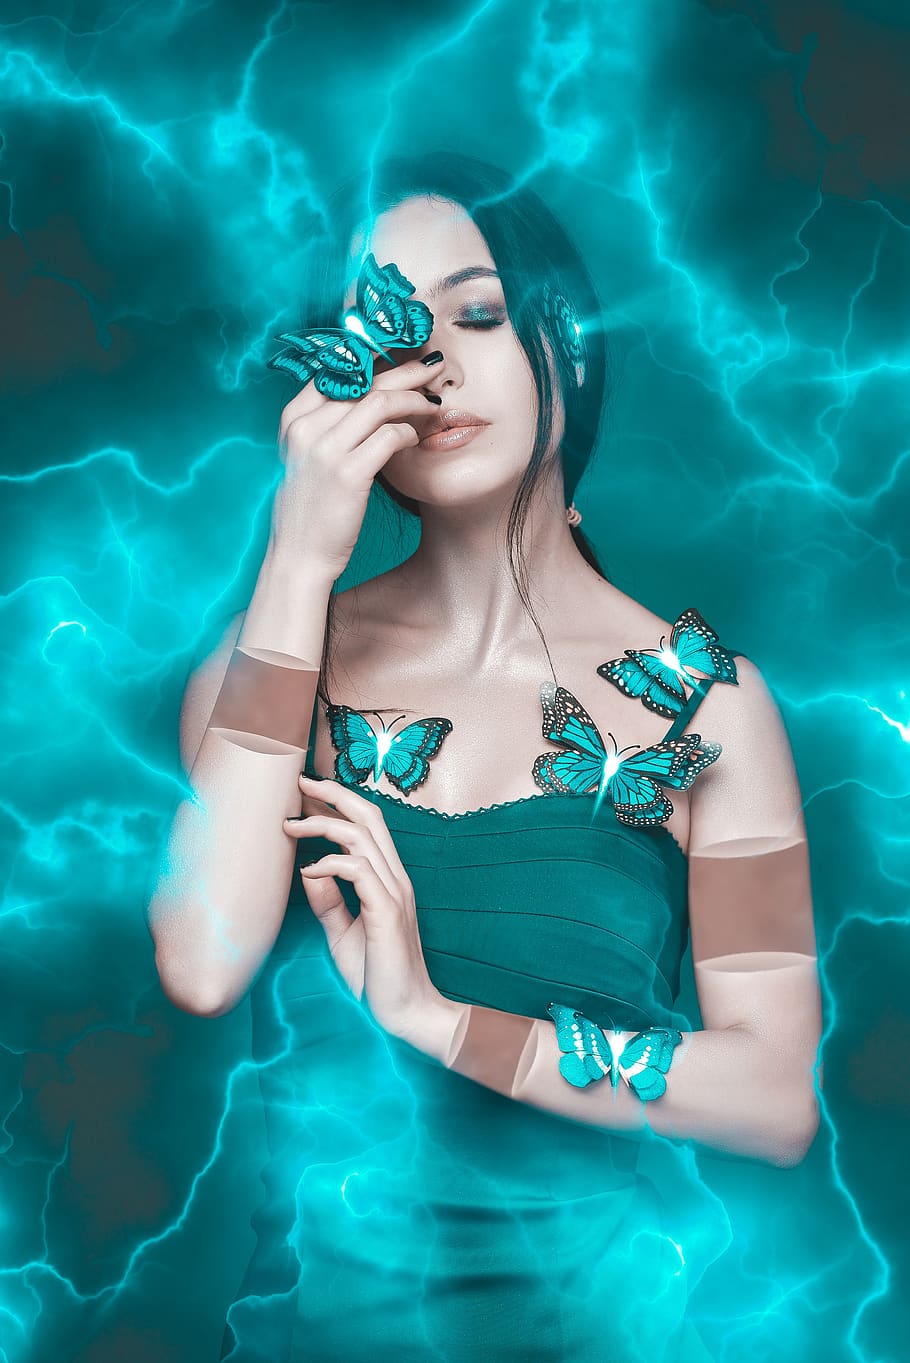 girl, magic, woman, butterfly, turquoise, dress, hands, surrealism, neon, fantasy shop